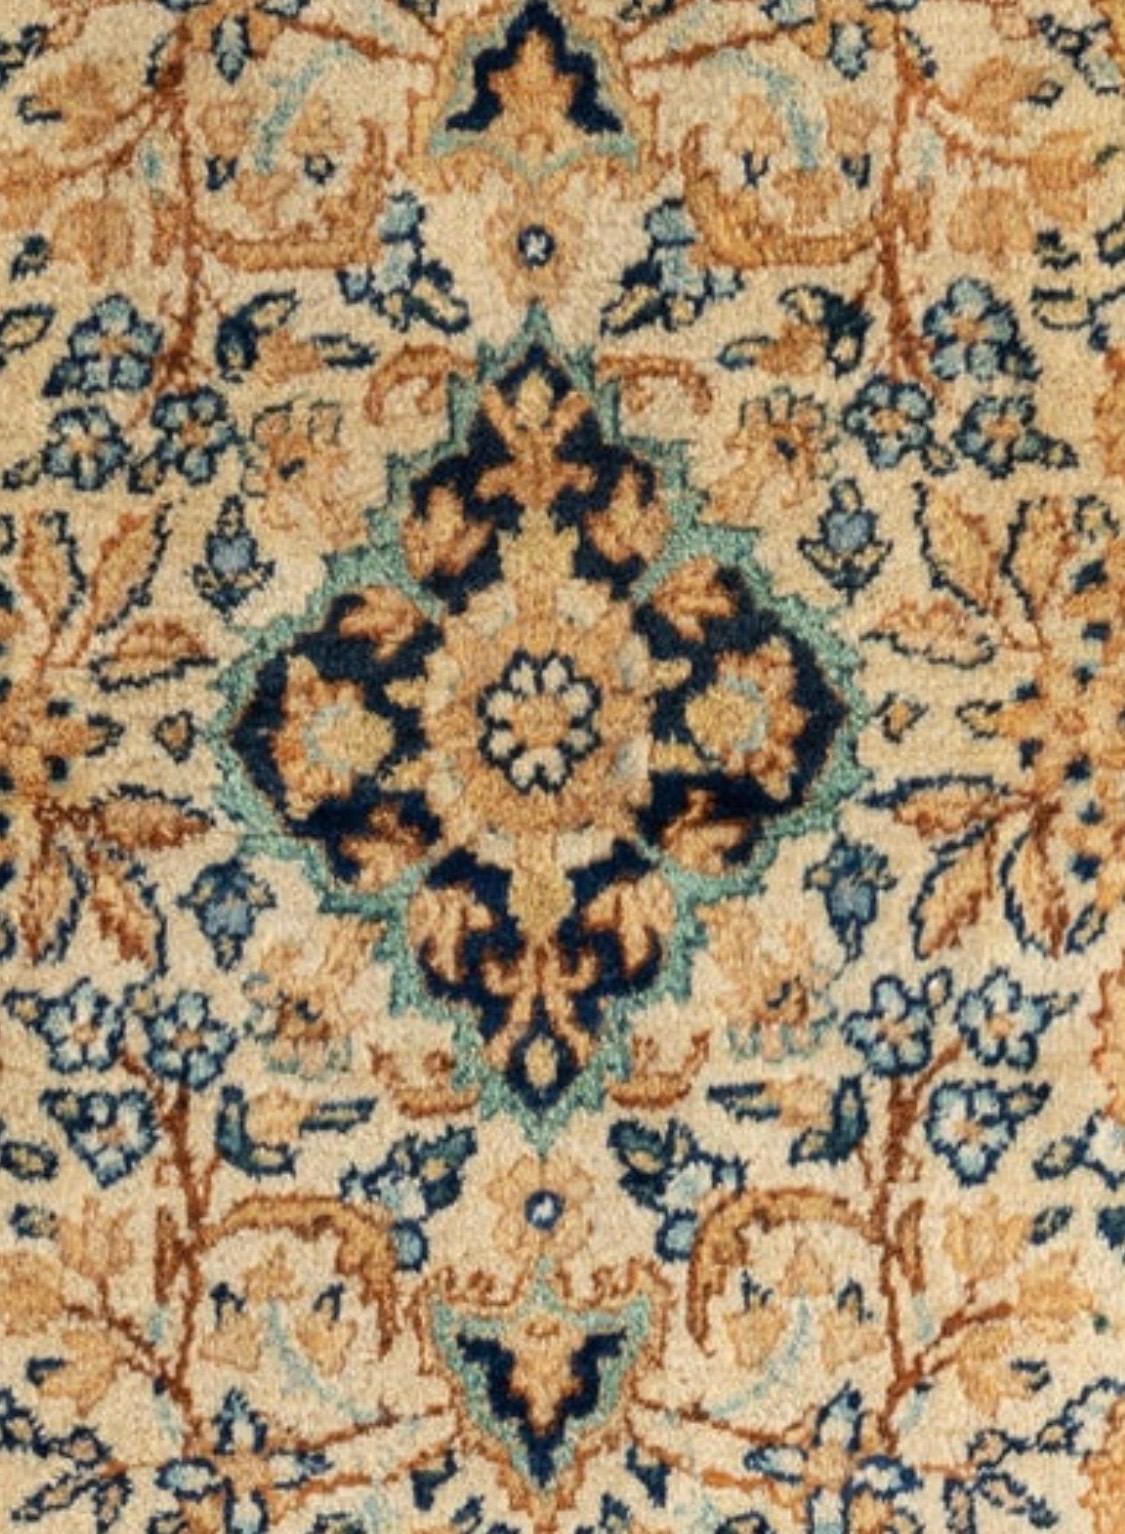 Kirman is an ancient city, with an incredible history going back over a thousand years. Marco Polo was one of the first westerners to view Kirman rugs. The city is located in the central south-eastern section of Iran, in the province that bears its